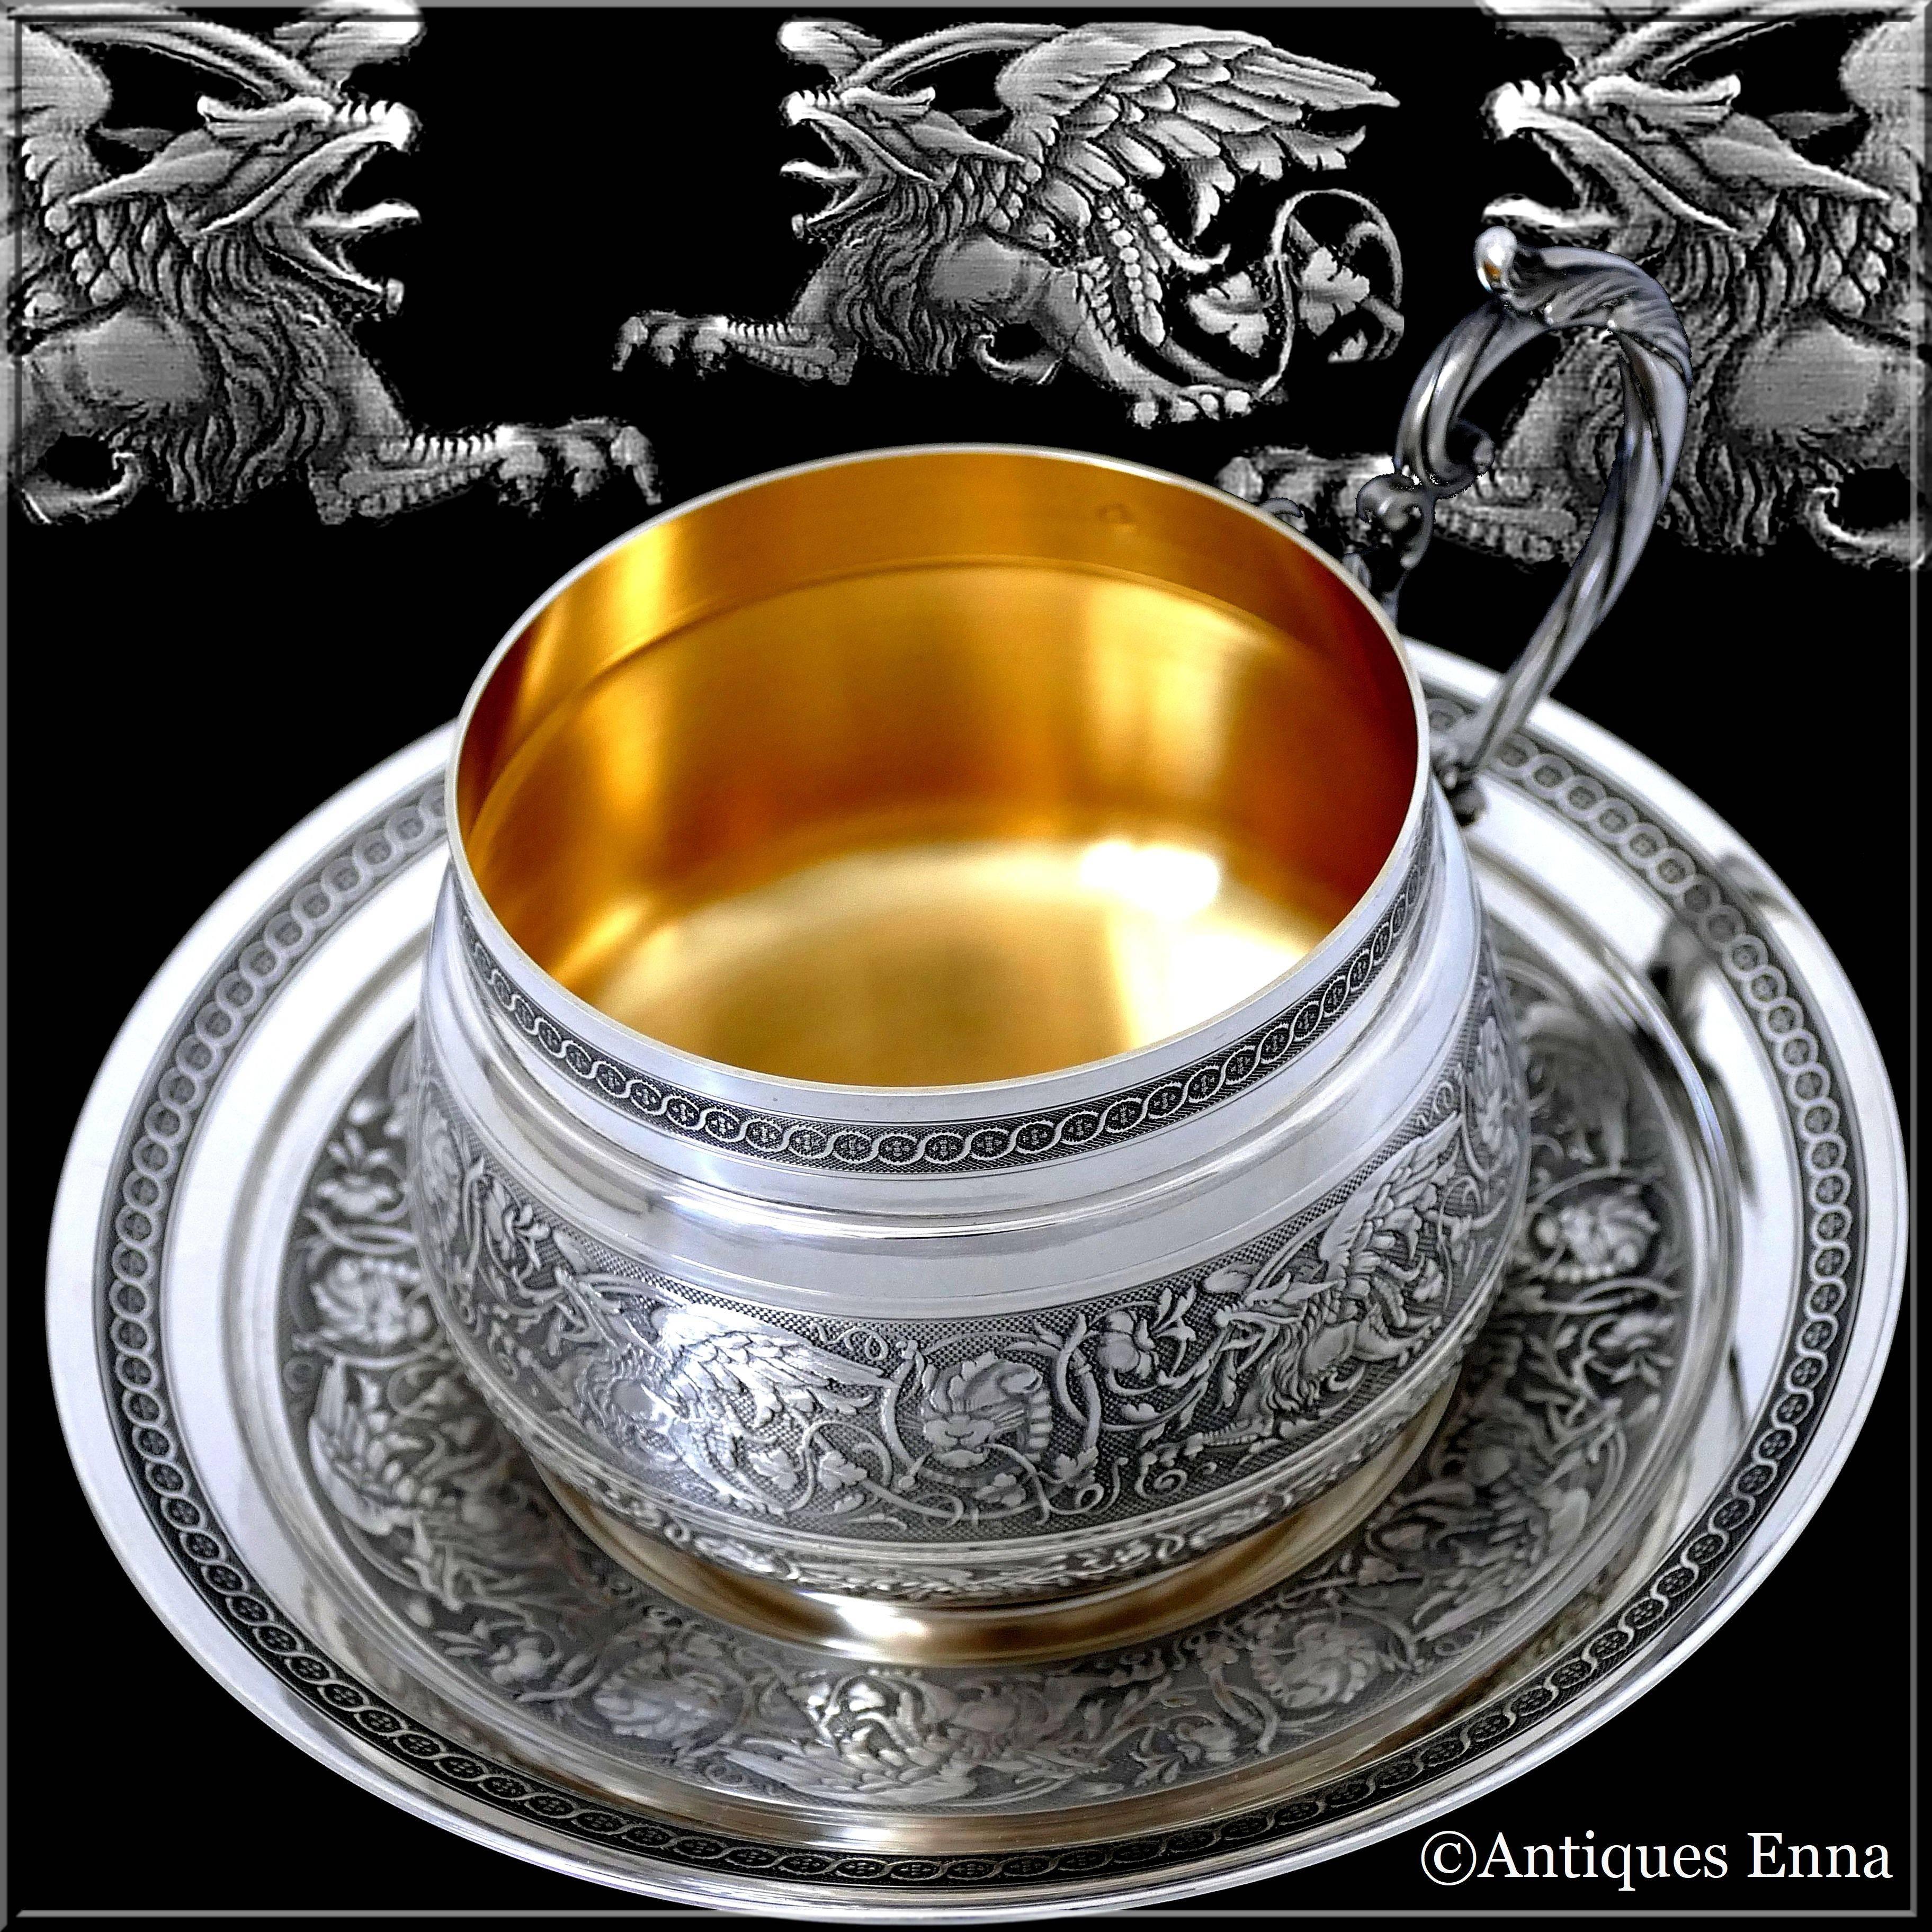 Head of Minerve 1 st titre for 950/1000 French sterling silver vermeil guarantee. The quality of the gold used to recover sterling silver is a minimum of 750 mils (18-karat).

Rare and large French sterling silver and 18-karat gold chocolate, tea,